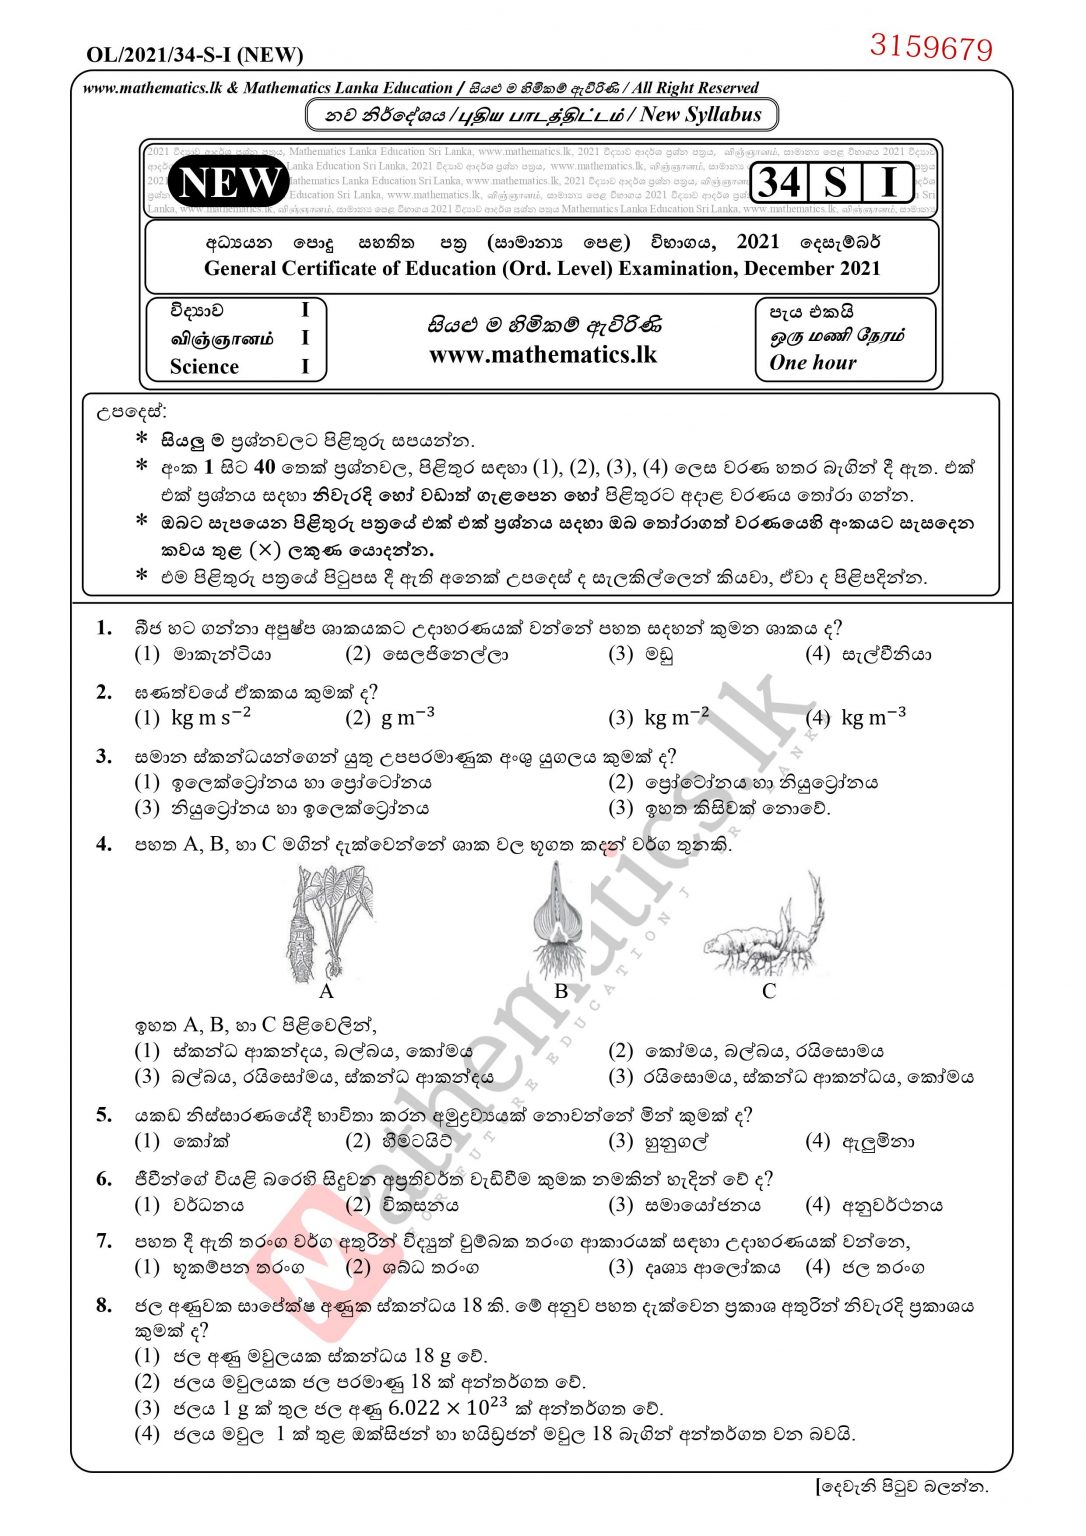 gce past papers with answers pdf download